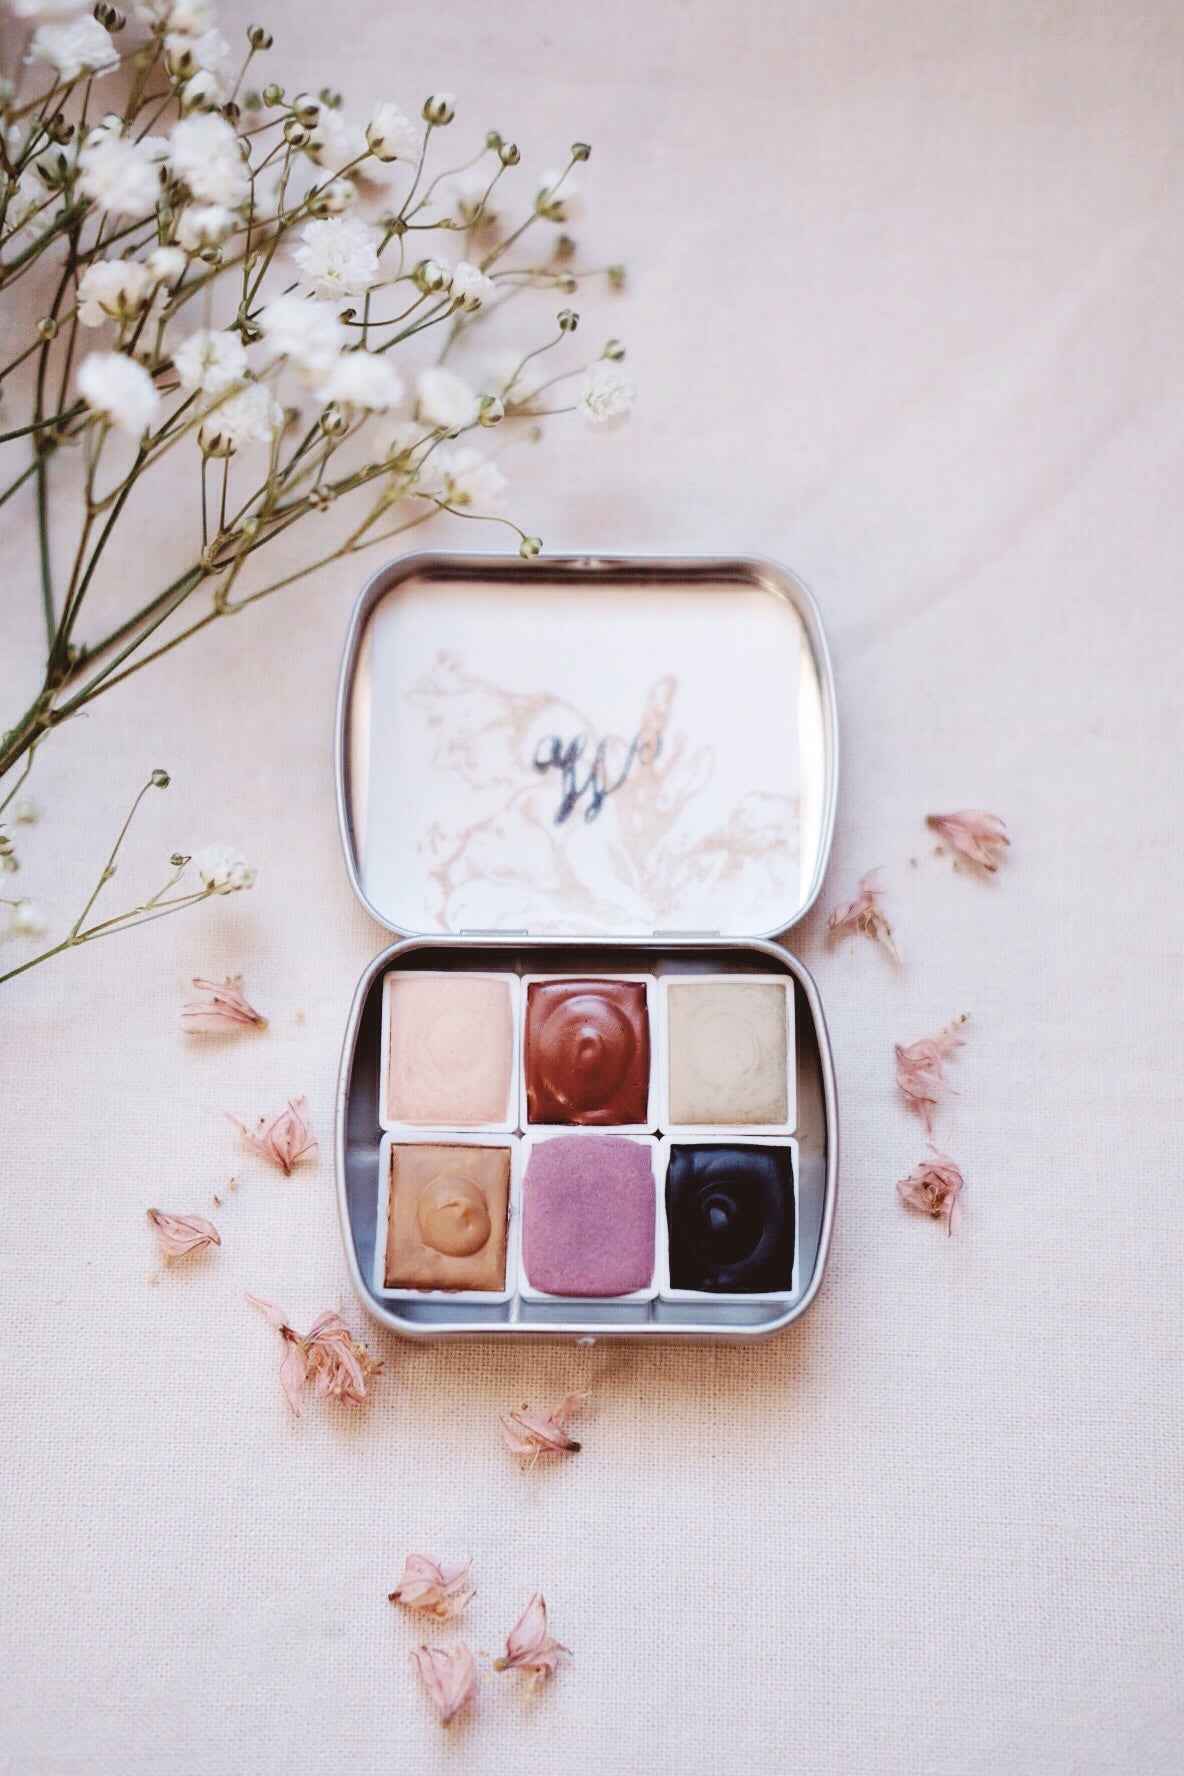 Foxtail Lily + Limited edition Gemstone Earth Mineral watercolor palette